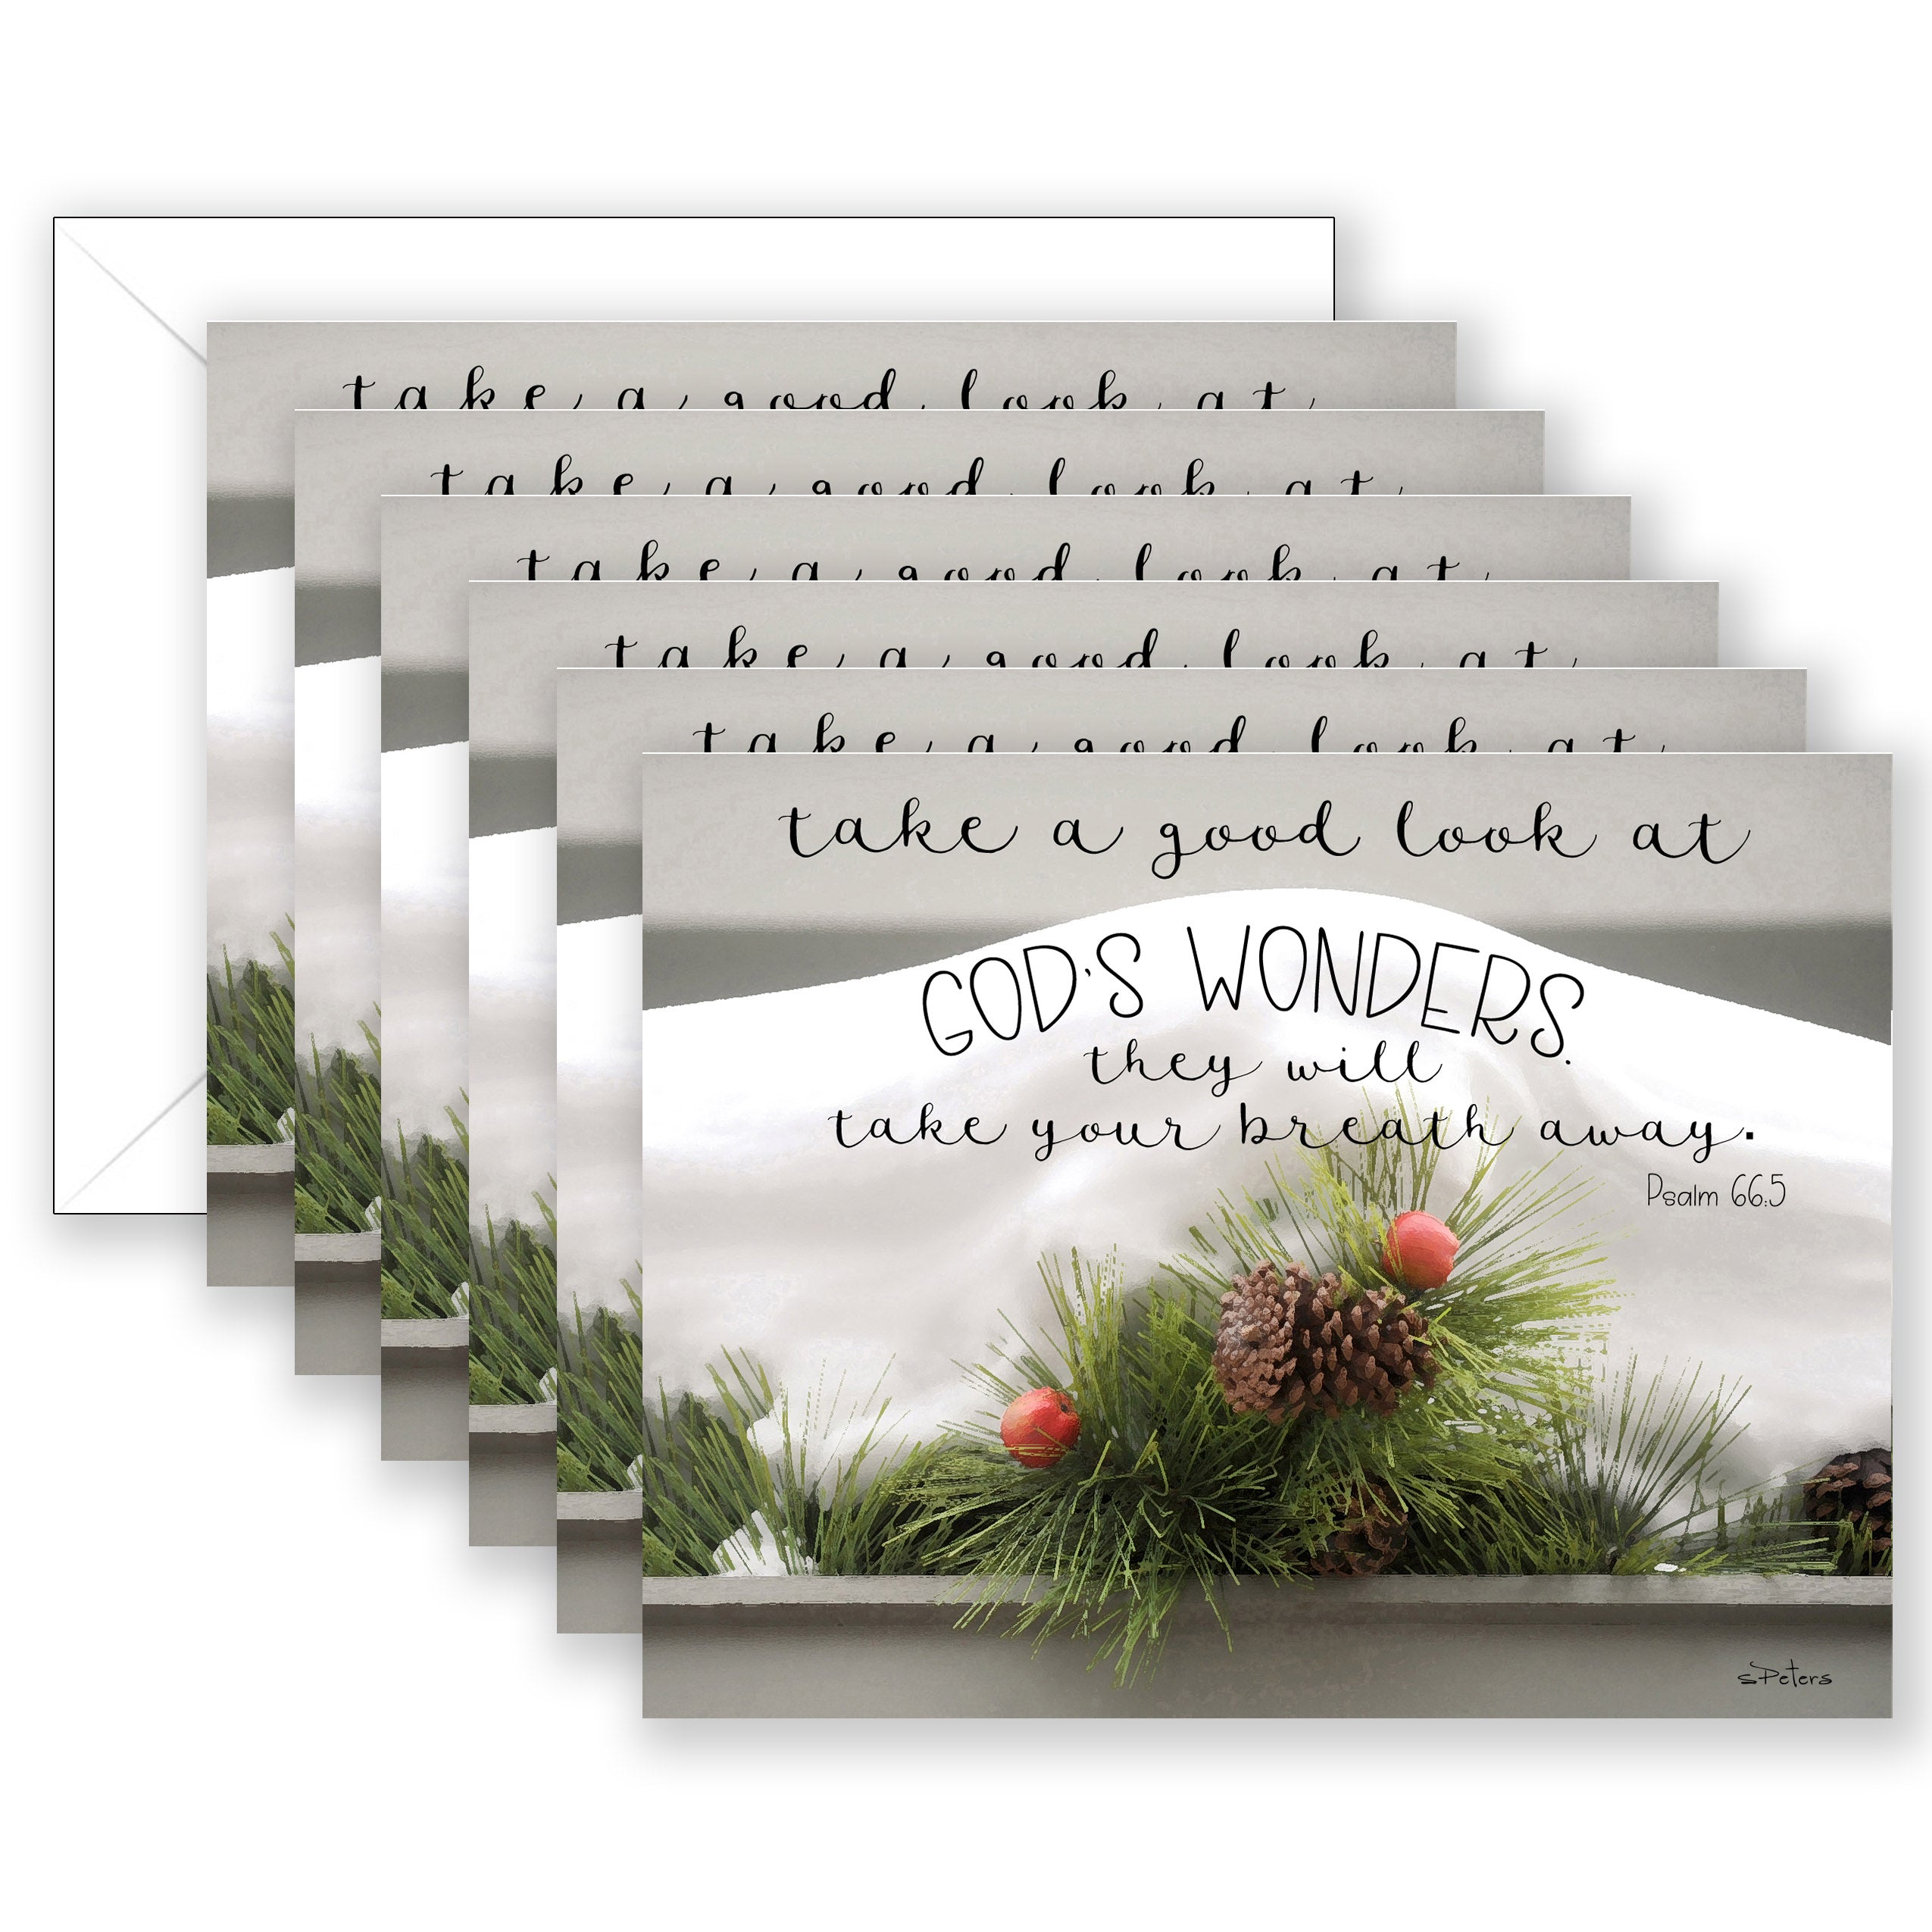 Softly Fallen (Psalm 66:5) - Boxed Christmas Card Collection